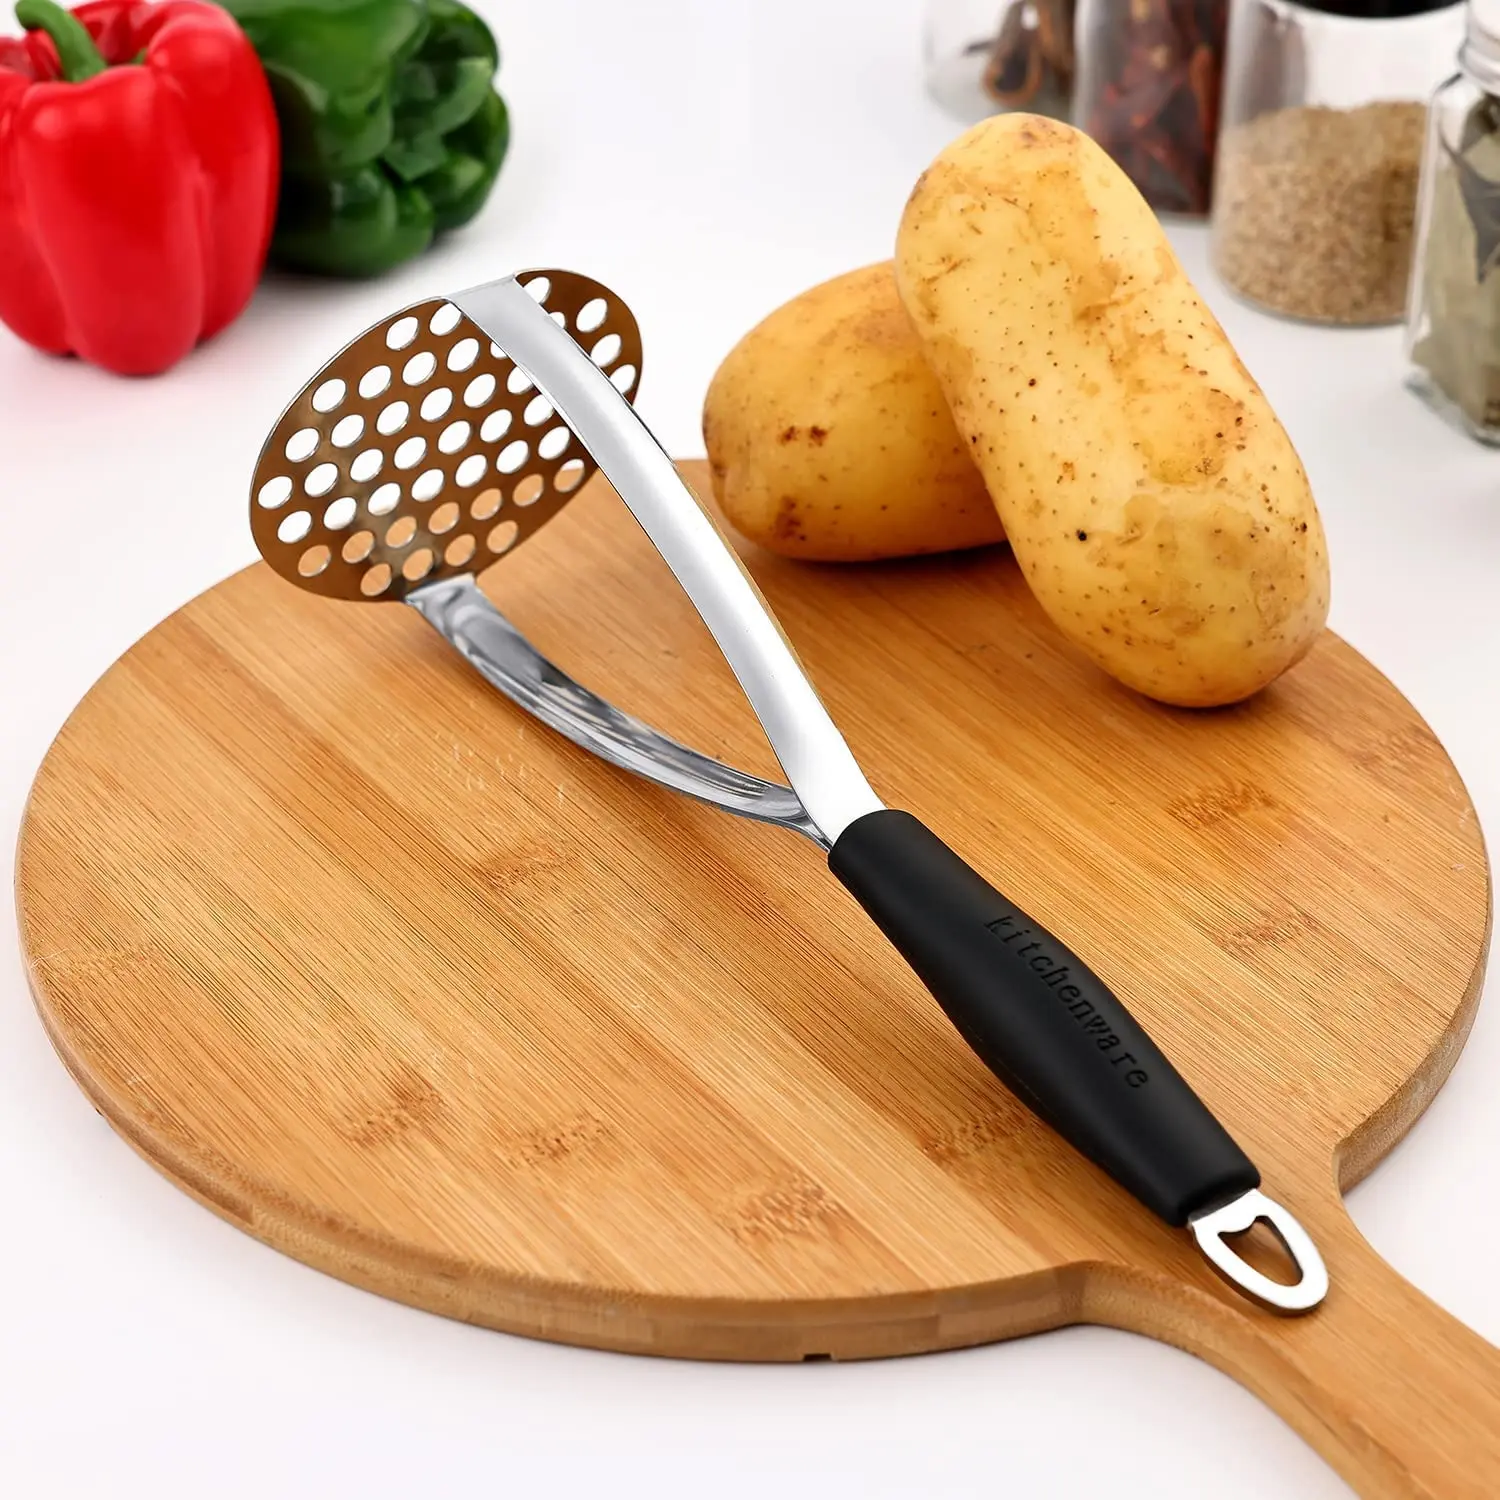 Source Stainless Steel Potato Masher Professional Integrated Masher Kitchen  Tool & Food Masher Potato Smasher with Silicone Handle on m.